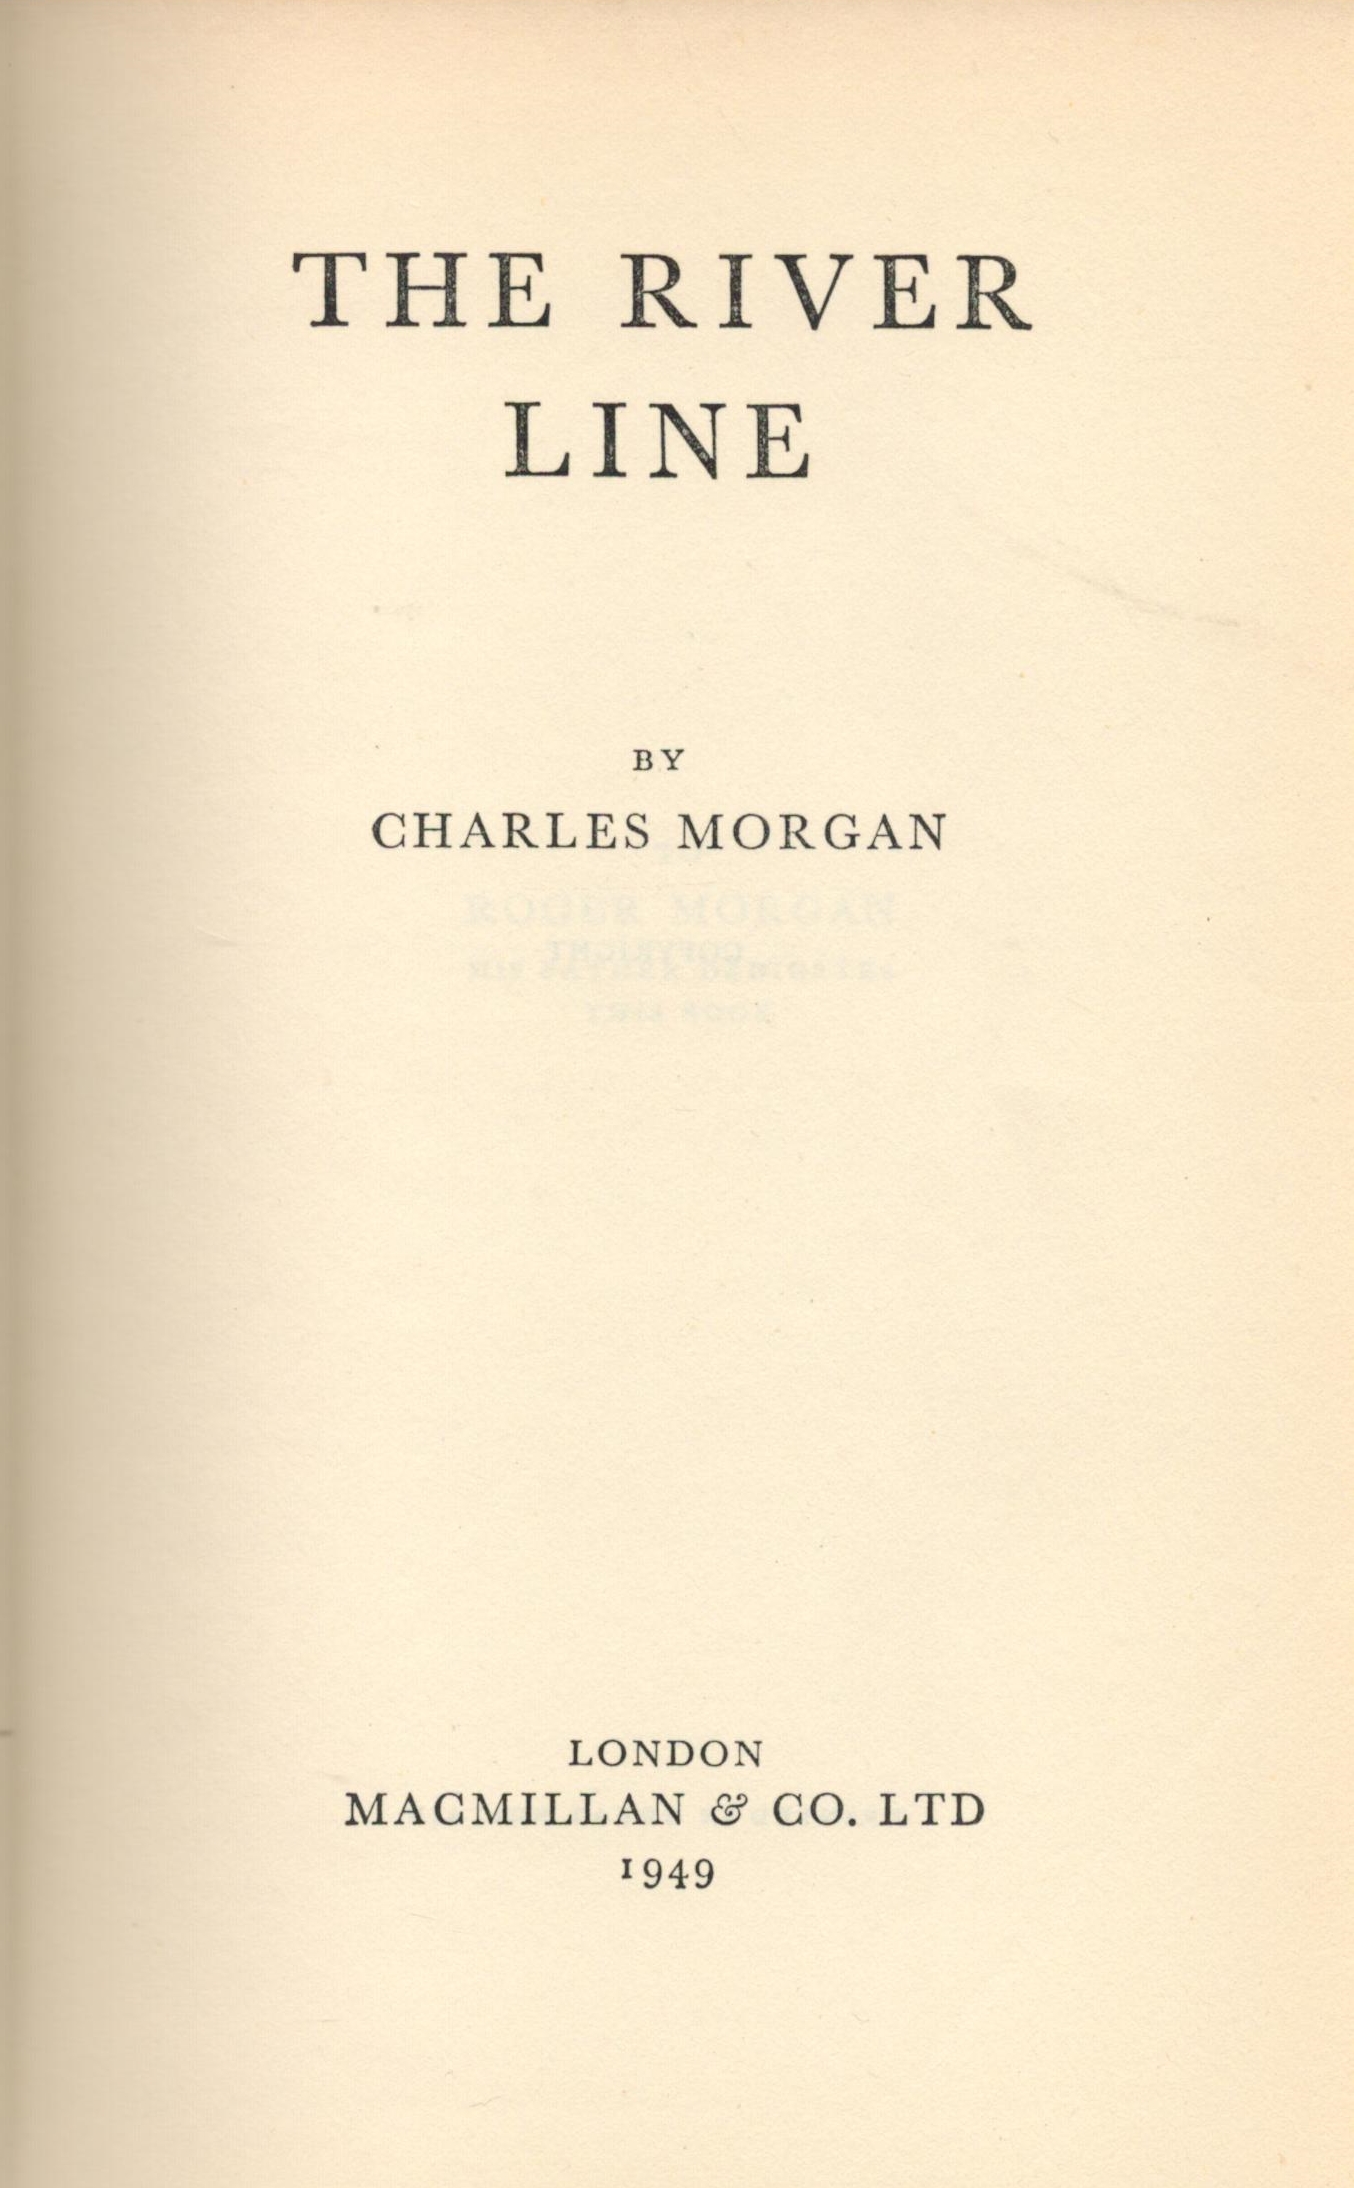 Signed Book Charles Morgan The River Line Hardback Book 1949 First Edition Signed by Charles - Image 3 of 3